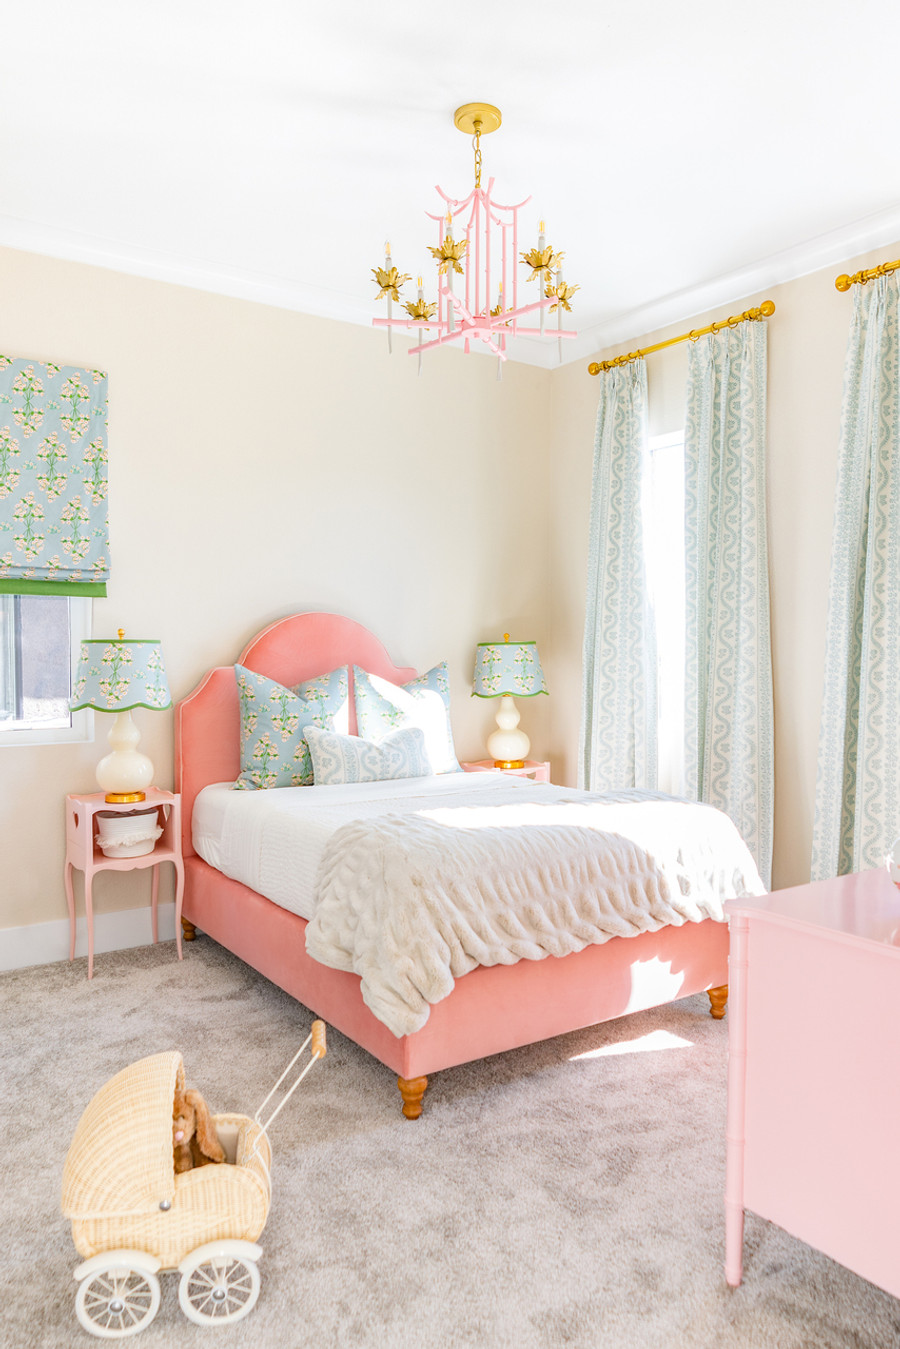 Sister Parish Dolly Carolina Blue Drapes featured in pictures of bedroom are designed by Frances Claire Interiors and photos are by Kristin Elizabeth Photography. Roman Shade and pillows behind the Dolly pillow on the bed are in Lulie Wallace Suzanna.